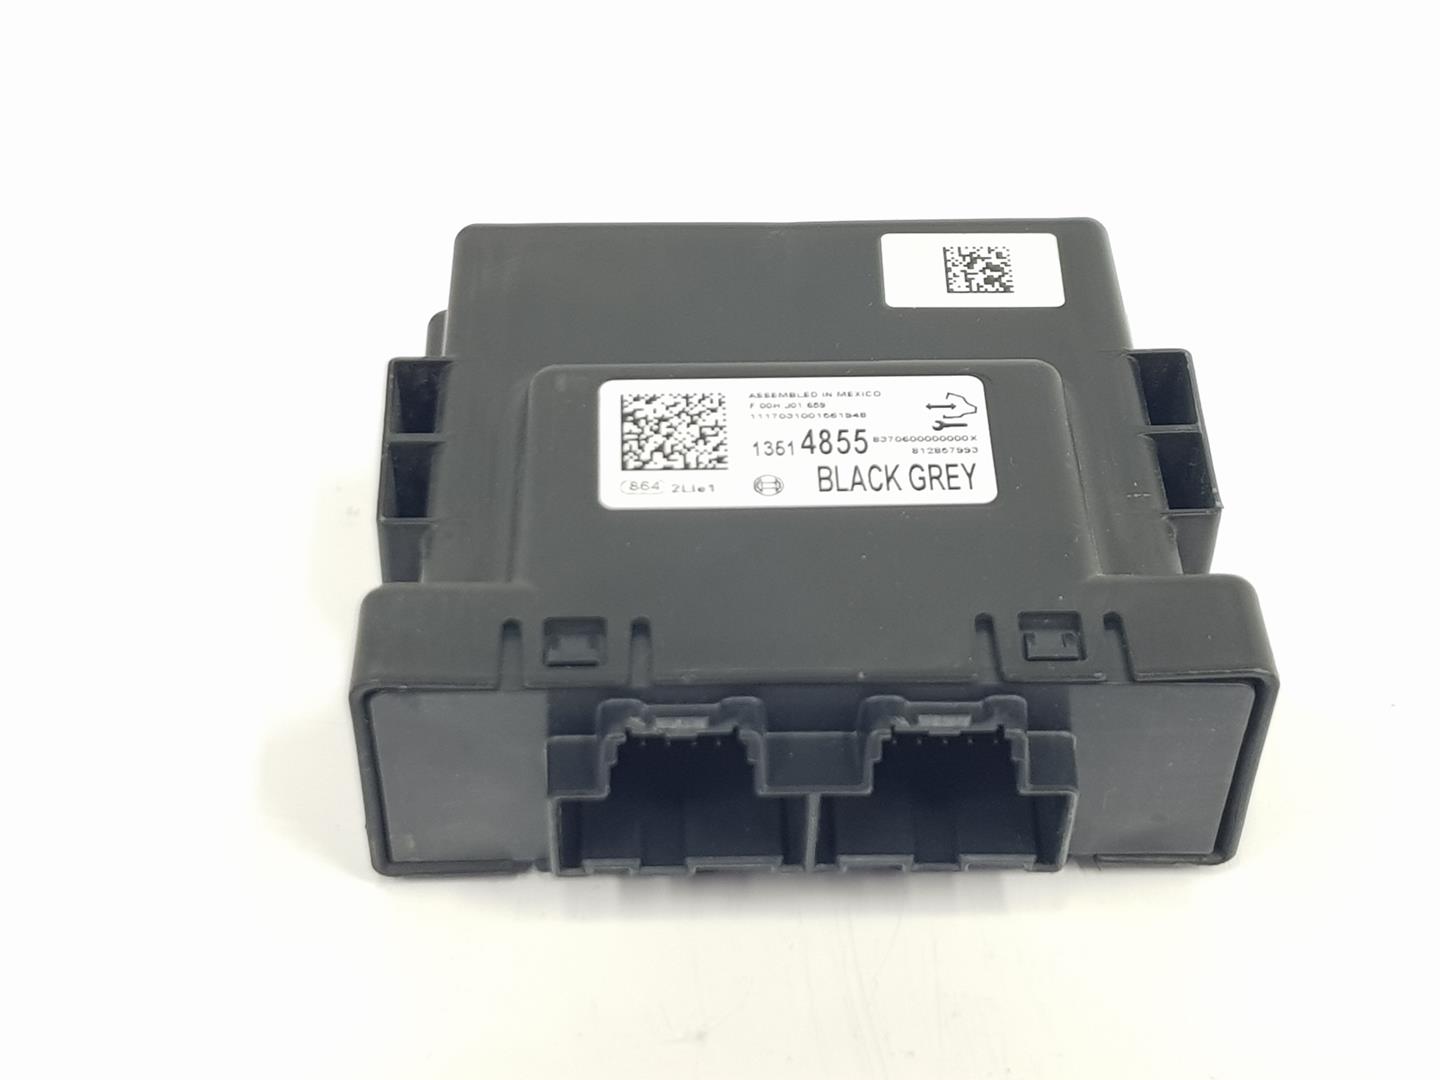 OPEL Astra K (2015-2021) Other Control Units 13514855, F00HJ01659 19932729